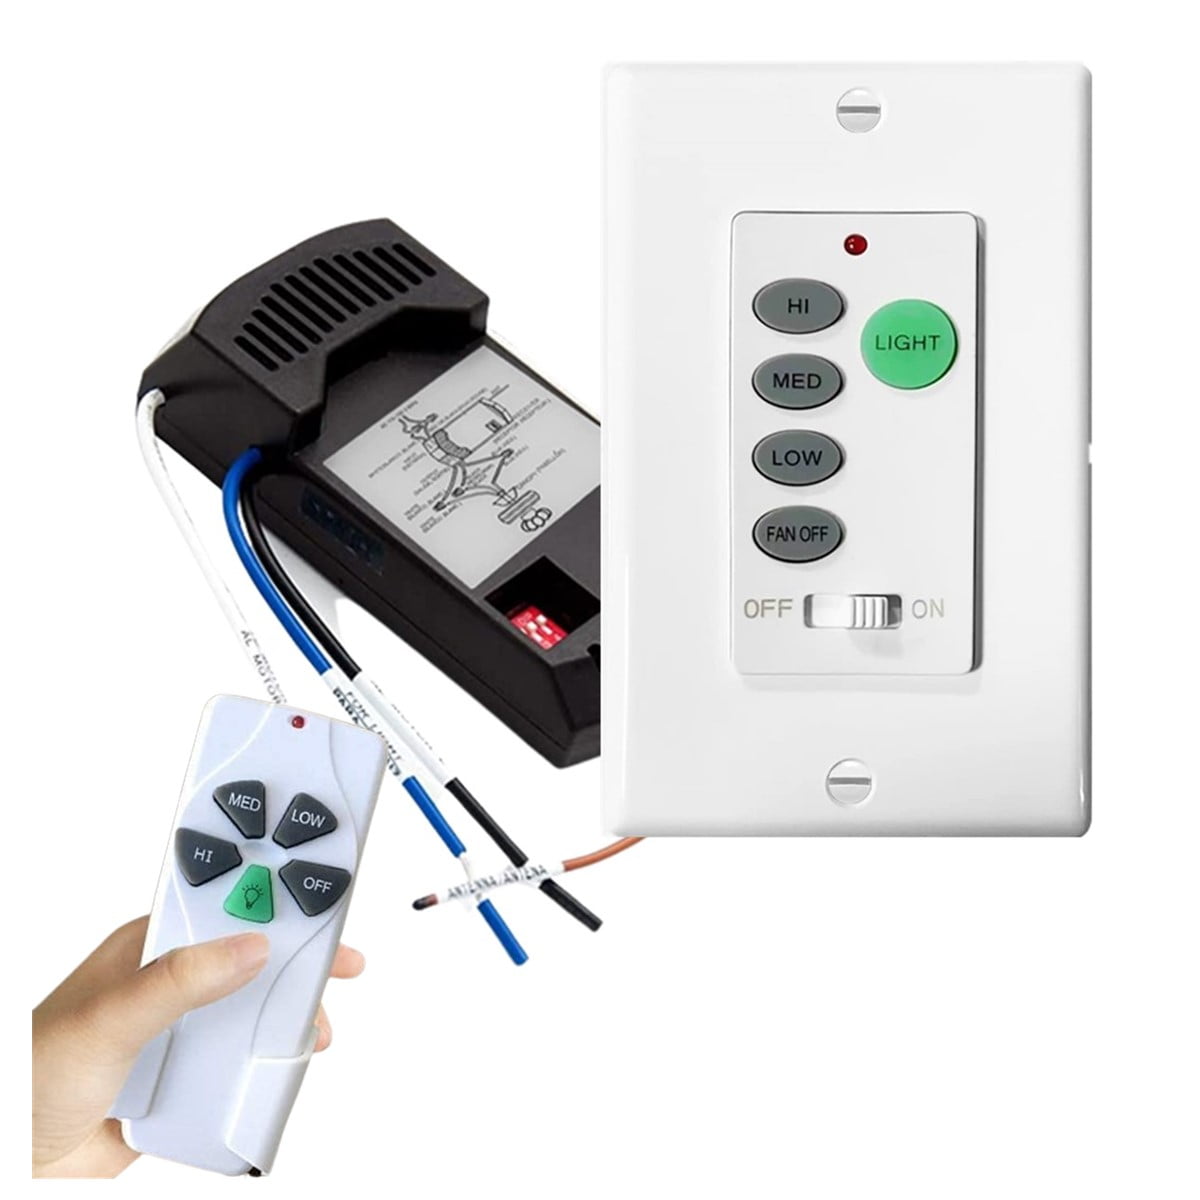 In-Wall Lighting Control Switch with Wireless Remote at Menards®